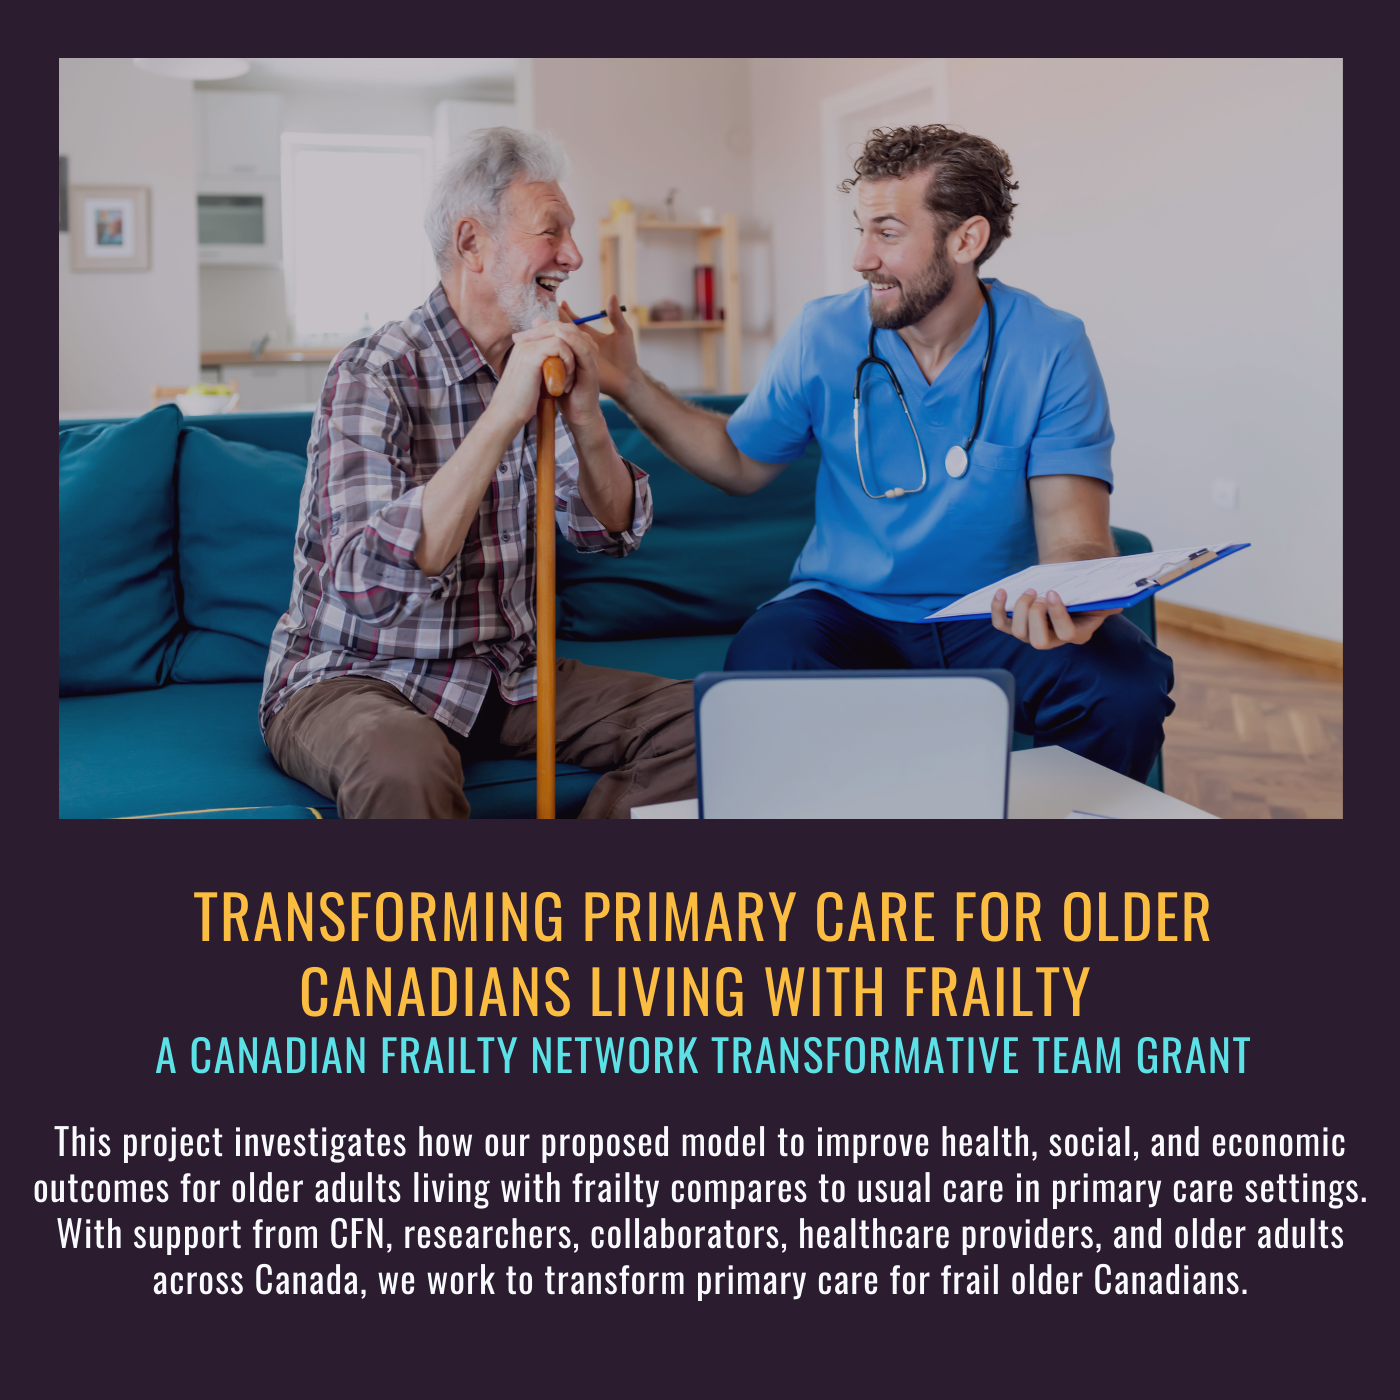 Transforming primary care for older adults living with frailty. A CFN Transformative grant. This project investigates how our proposed model to improve health, social, and economic outcomes for older adults living with frailty compares to usual care in primary care settings. With support from CFN, researchers, collaborators, healthcare providers, and older adults across Canada, we work to transform primary care for frail older Canadians. Picture of older man with younger health care provider